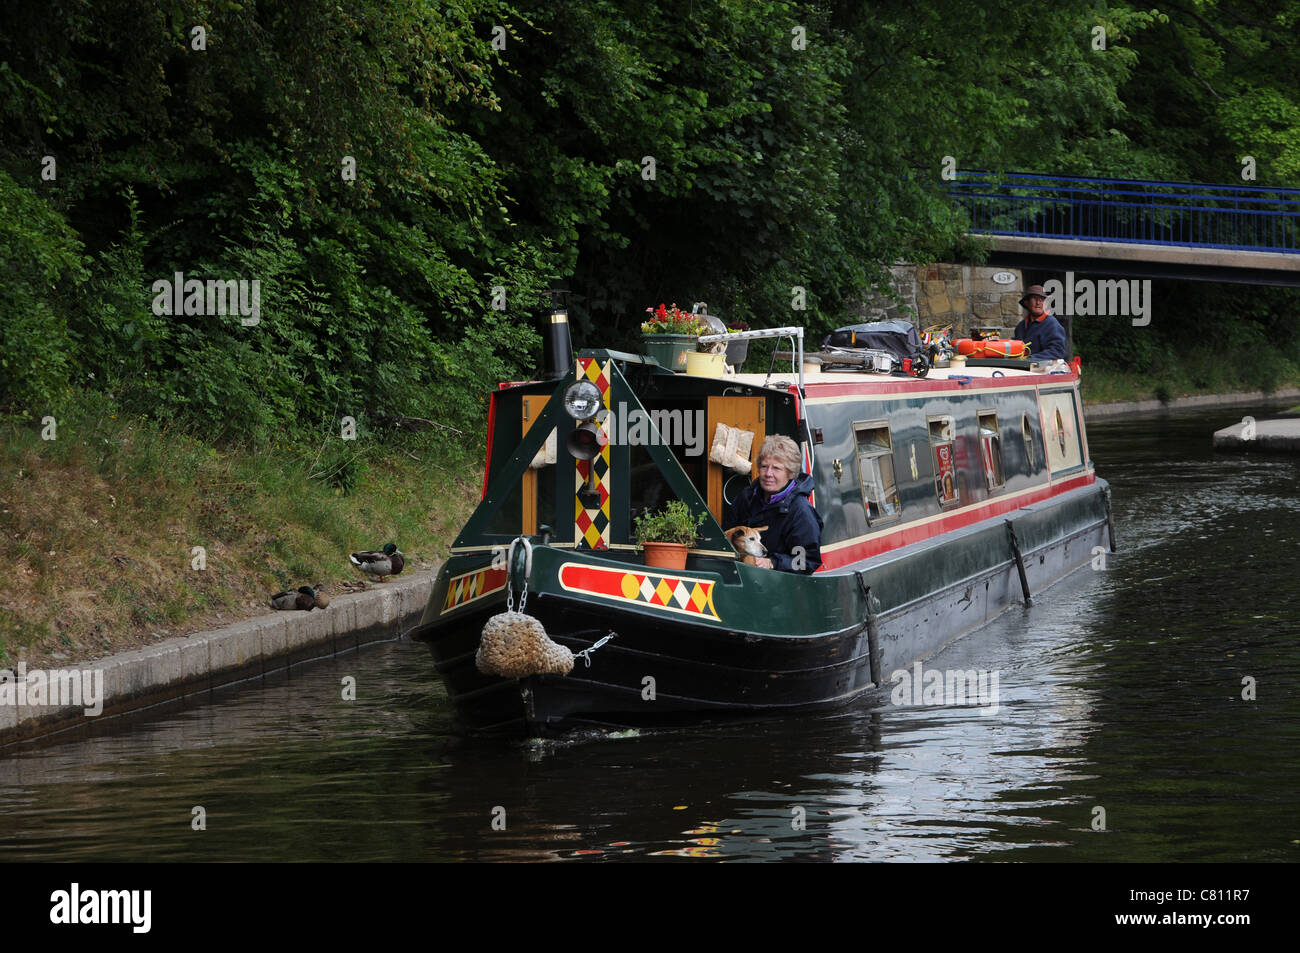 CANAL BARCONE SUL CANAL A LLANGOLLEN, GALLES Foto Stock